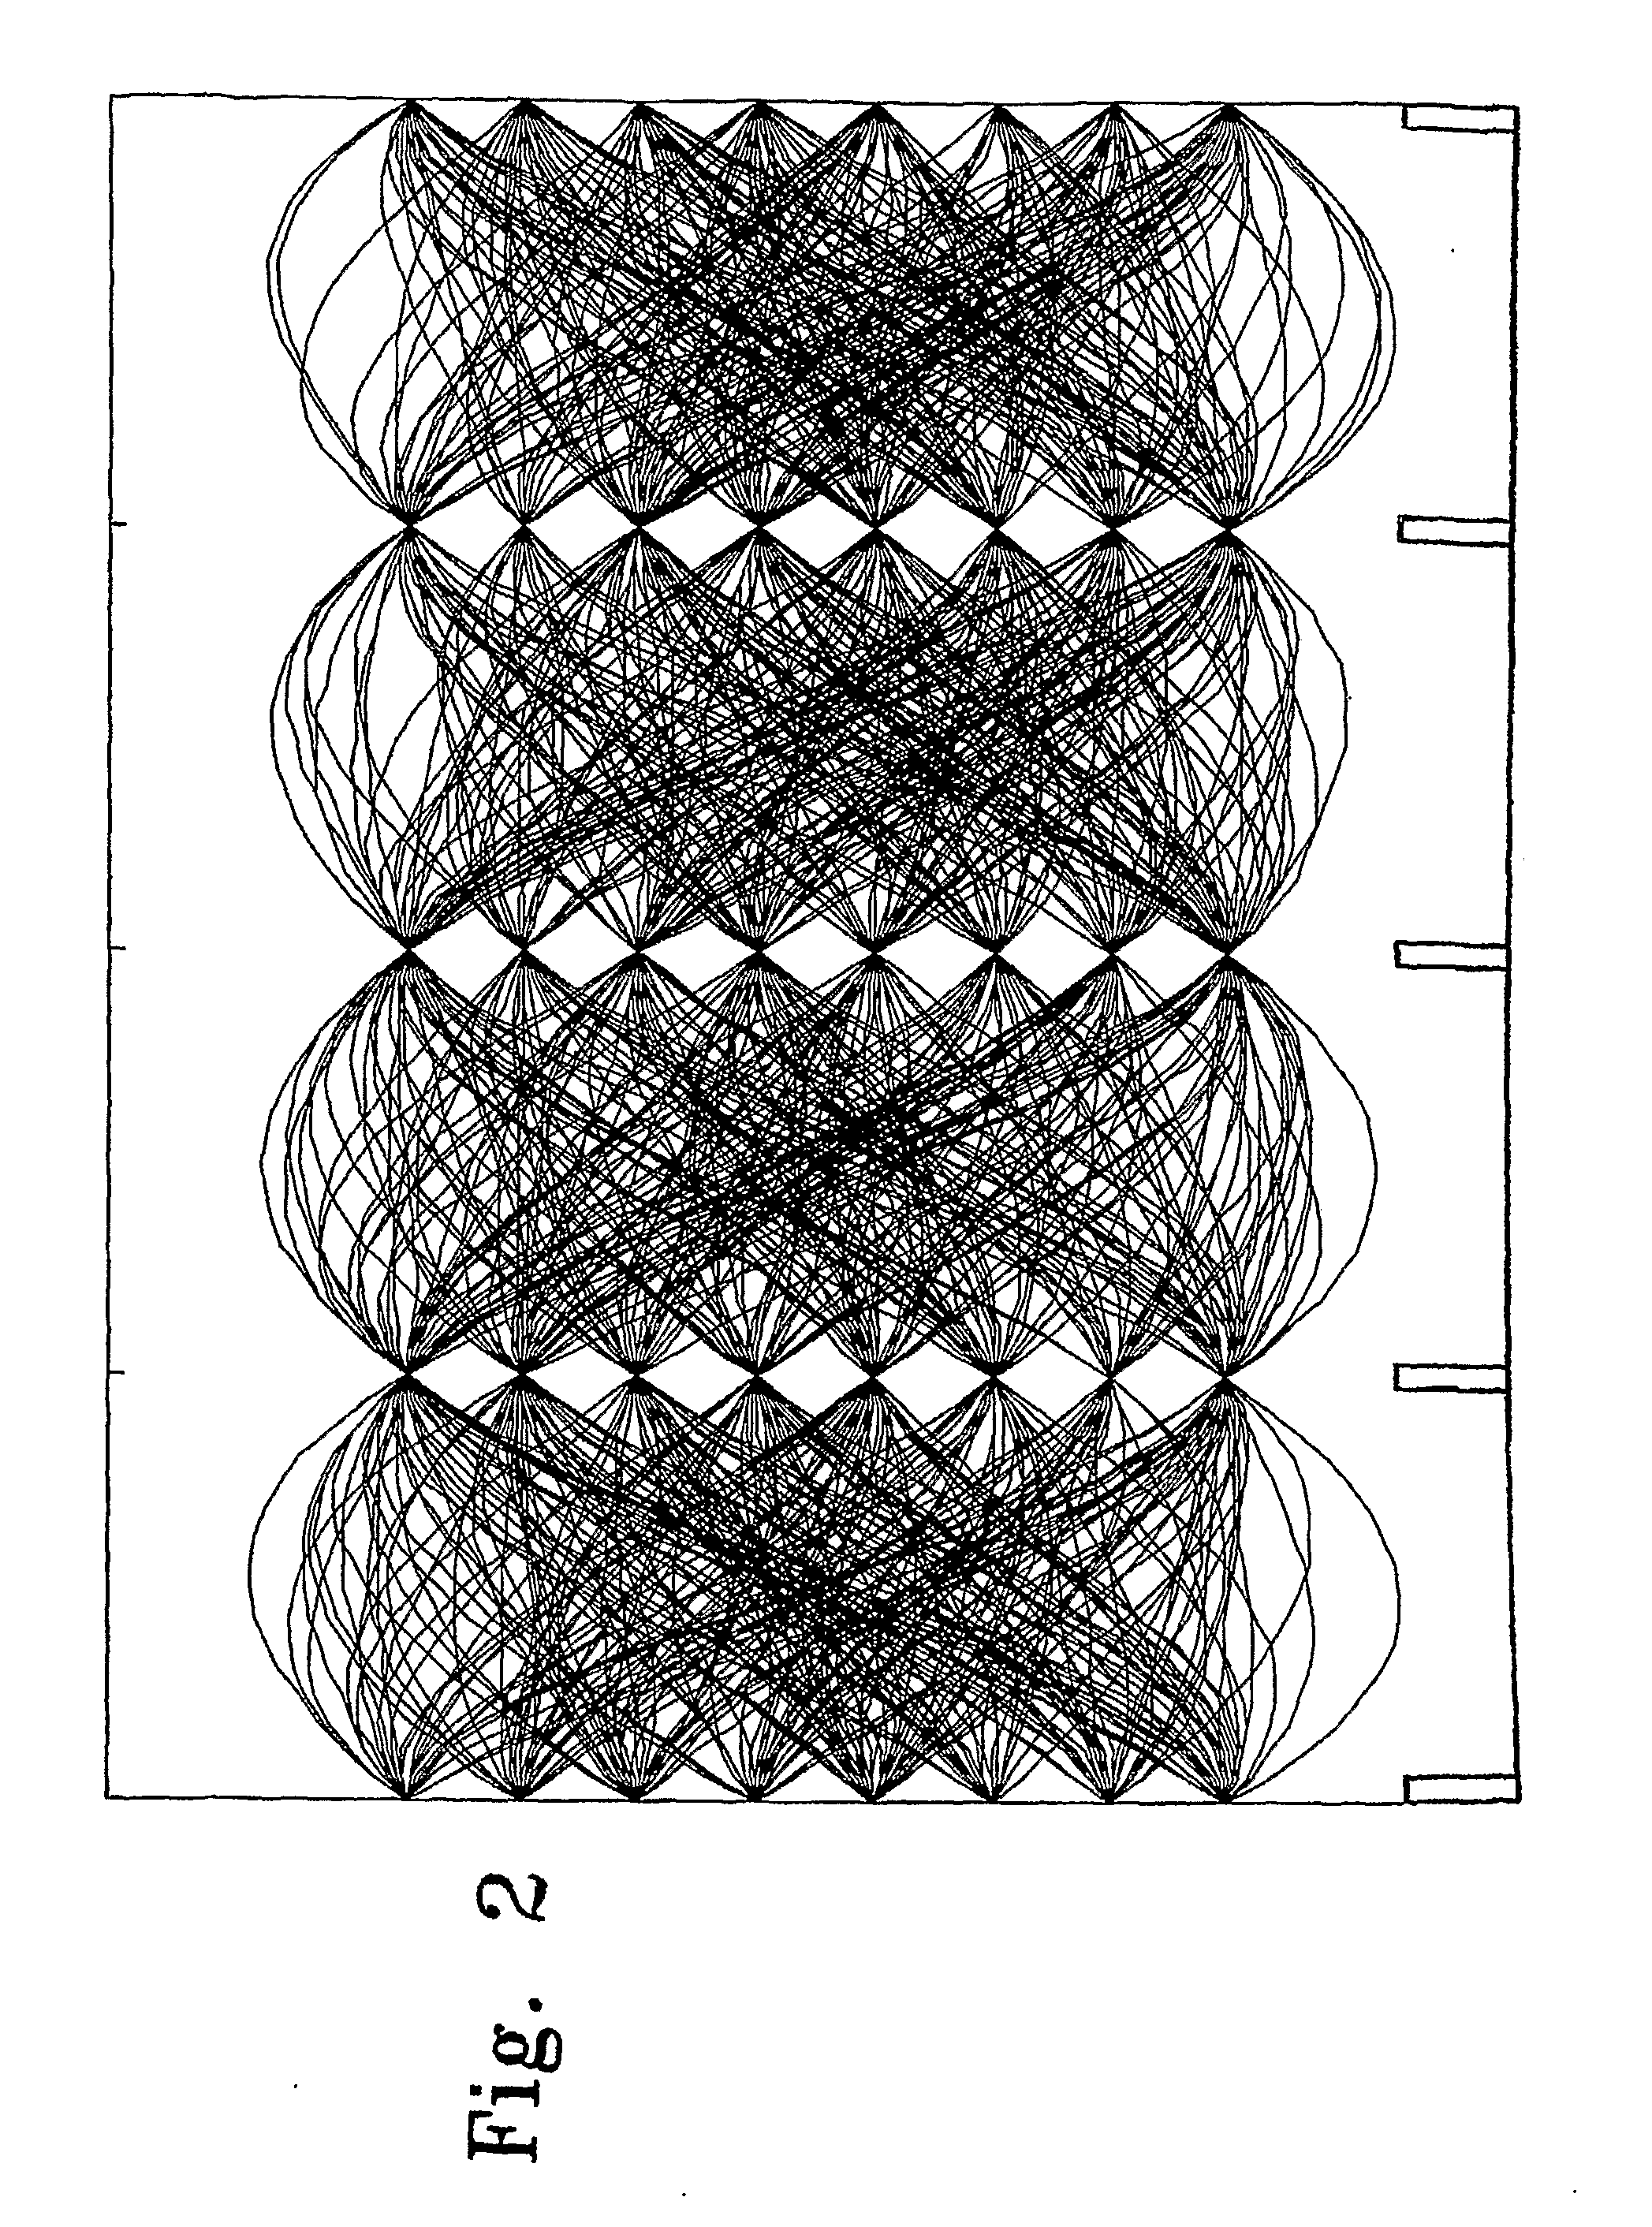 Apparatus For And Method Of Controlling A Feedforward Filter Of An Equalizer